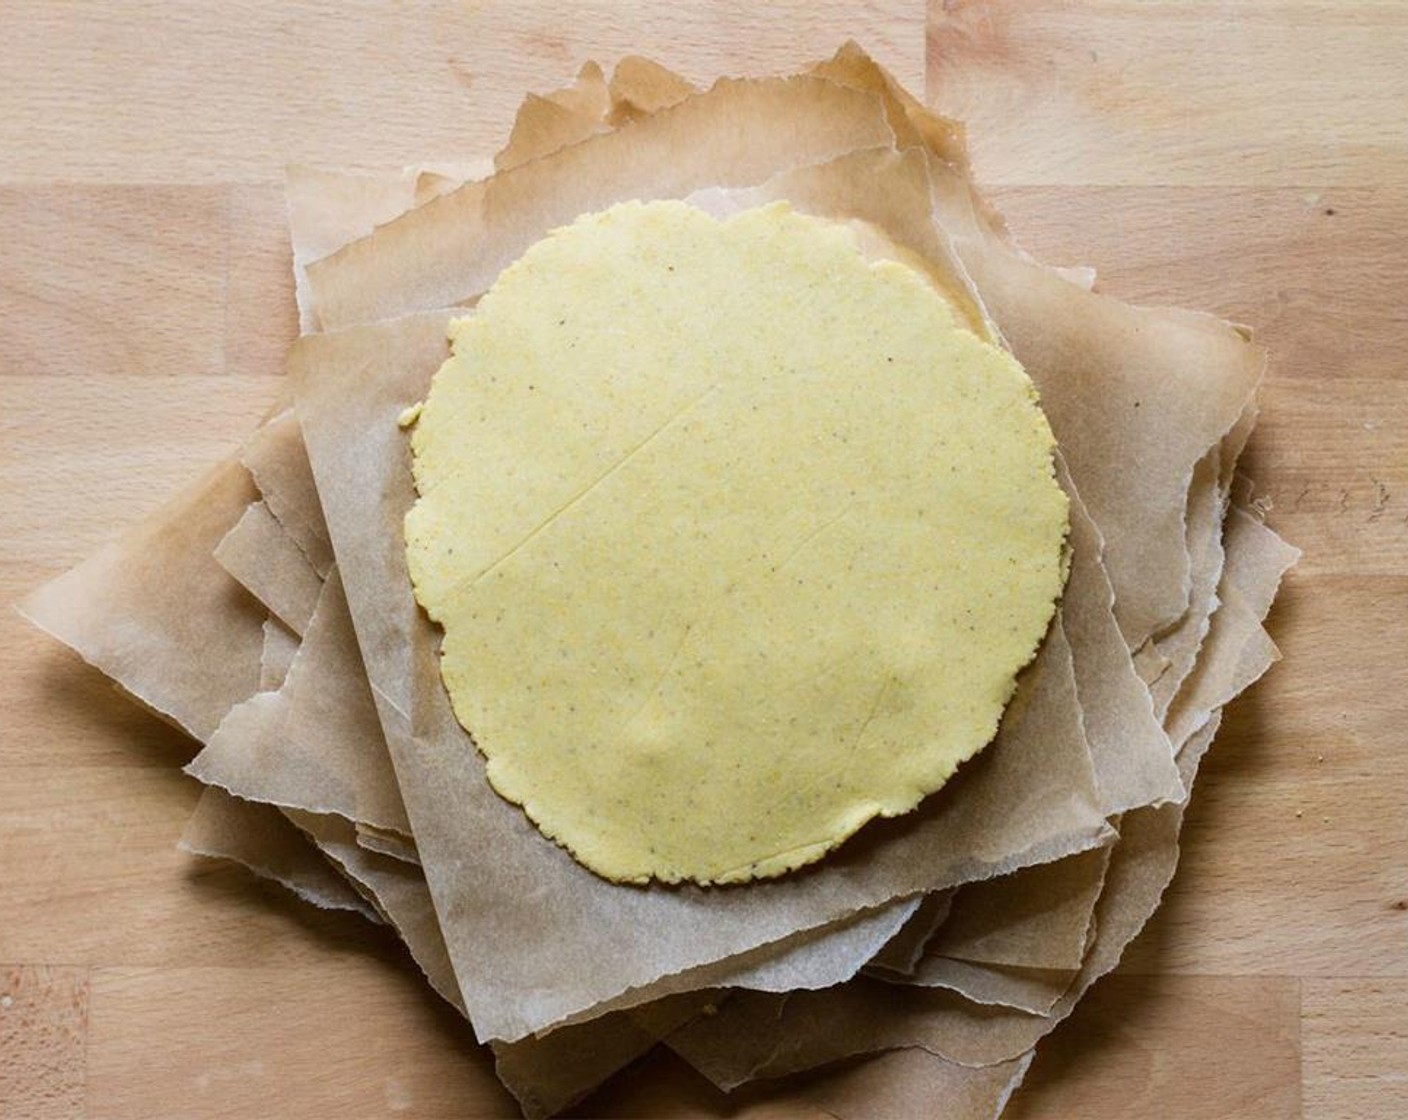 step 10 Carefully peel the dough off the parchment and place on a smaller piece of parchment. Continue this process and keep stacking the tortillas with small sheets of parchment so they don't stick together. Keep the stack covered with a towel as you work.